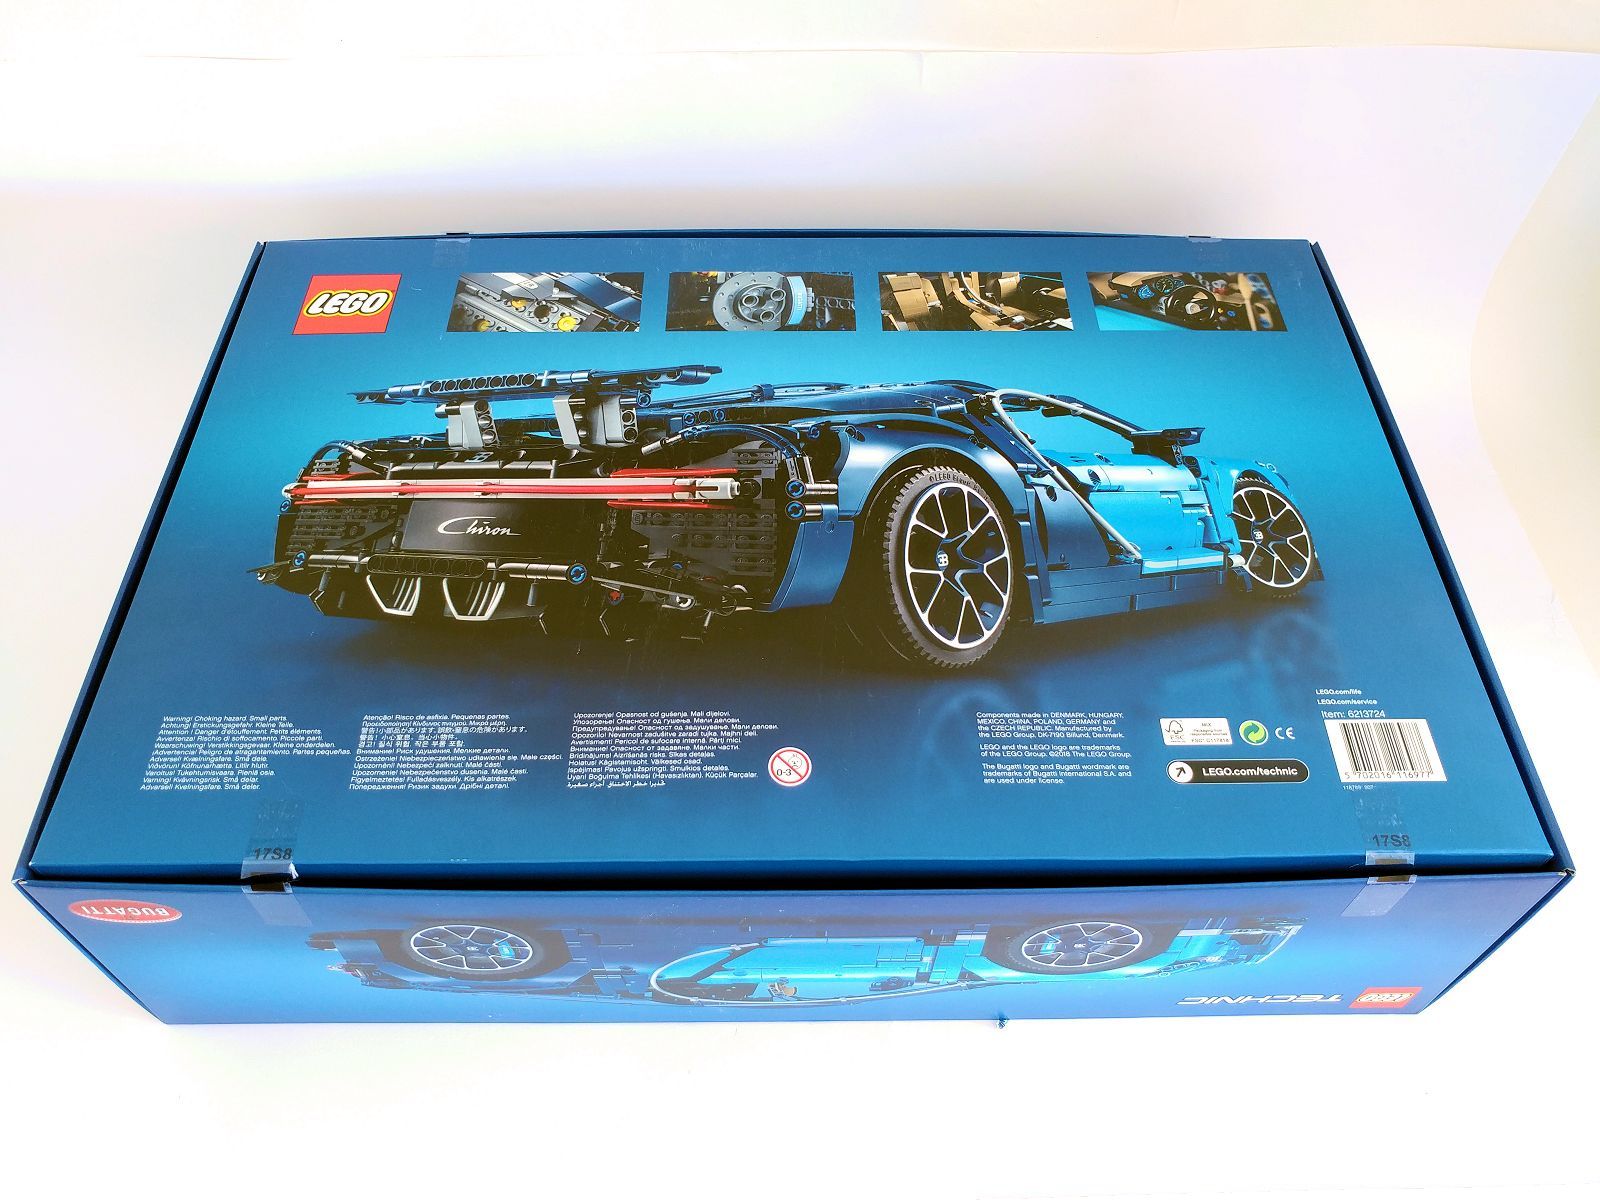 Technic parts review: 42083 Bugatti Chiron New Elementary: LEGO® parts, and techniques